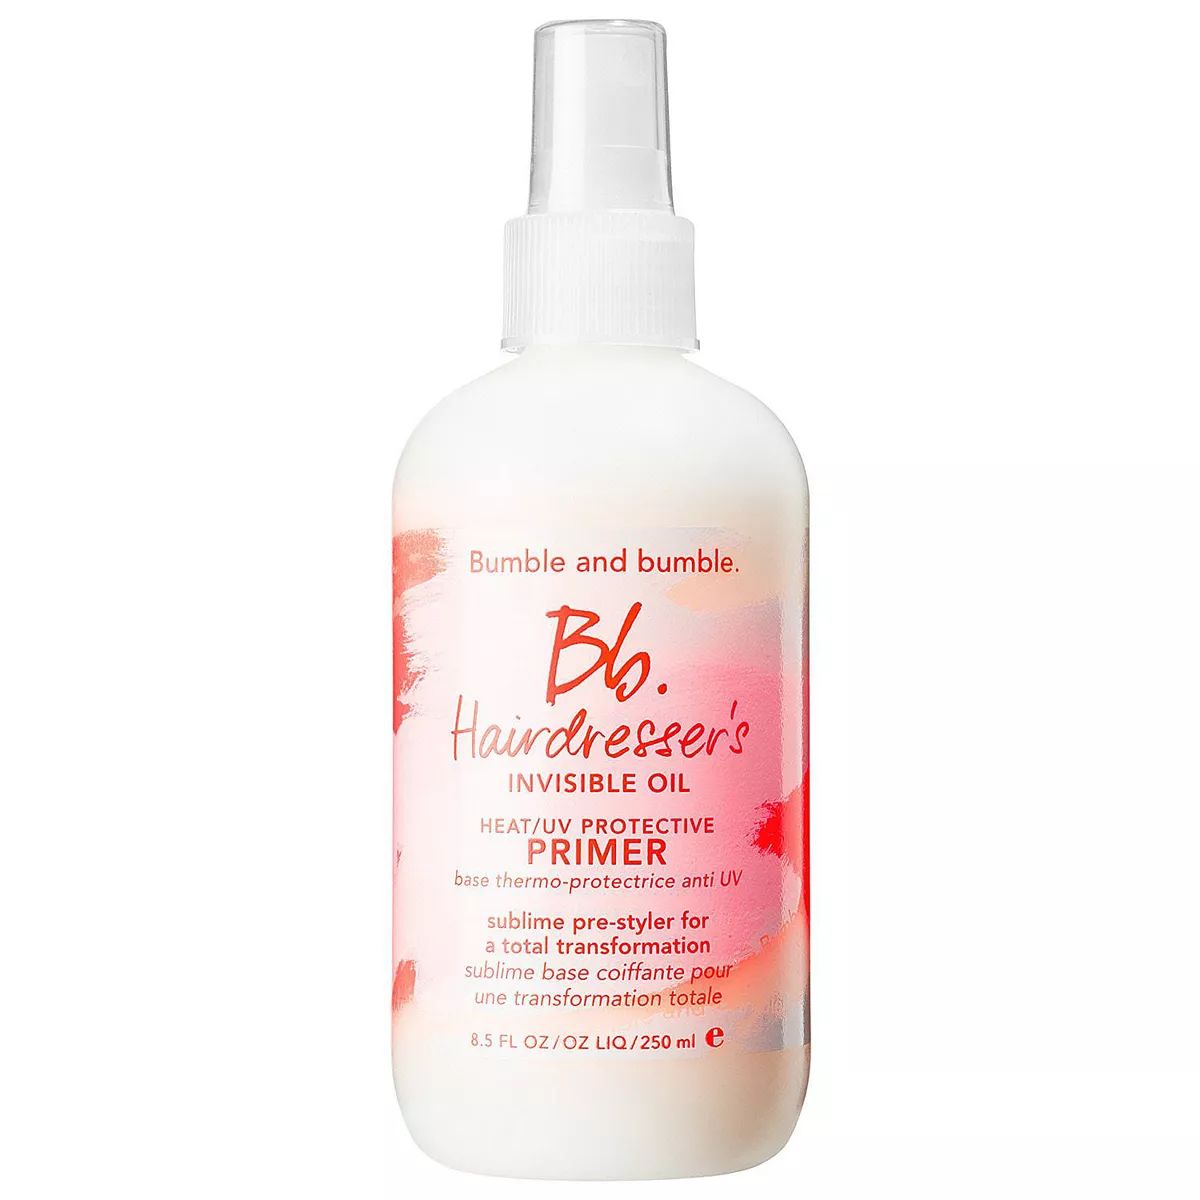 Bumble and bumble Hairdresser's Invisible Oil Heat Protectant Leave In Conditioner Primer | Kohl's